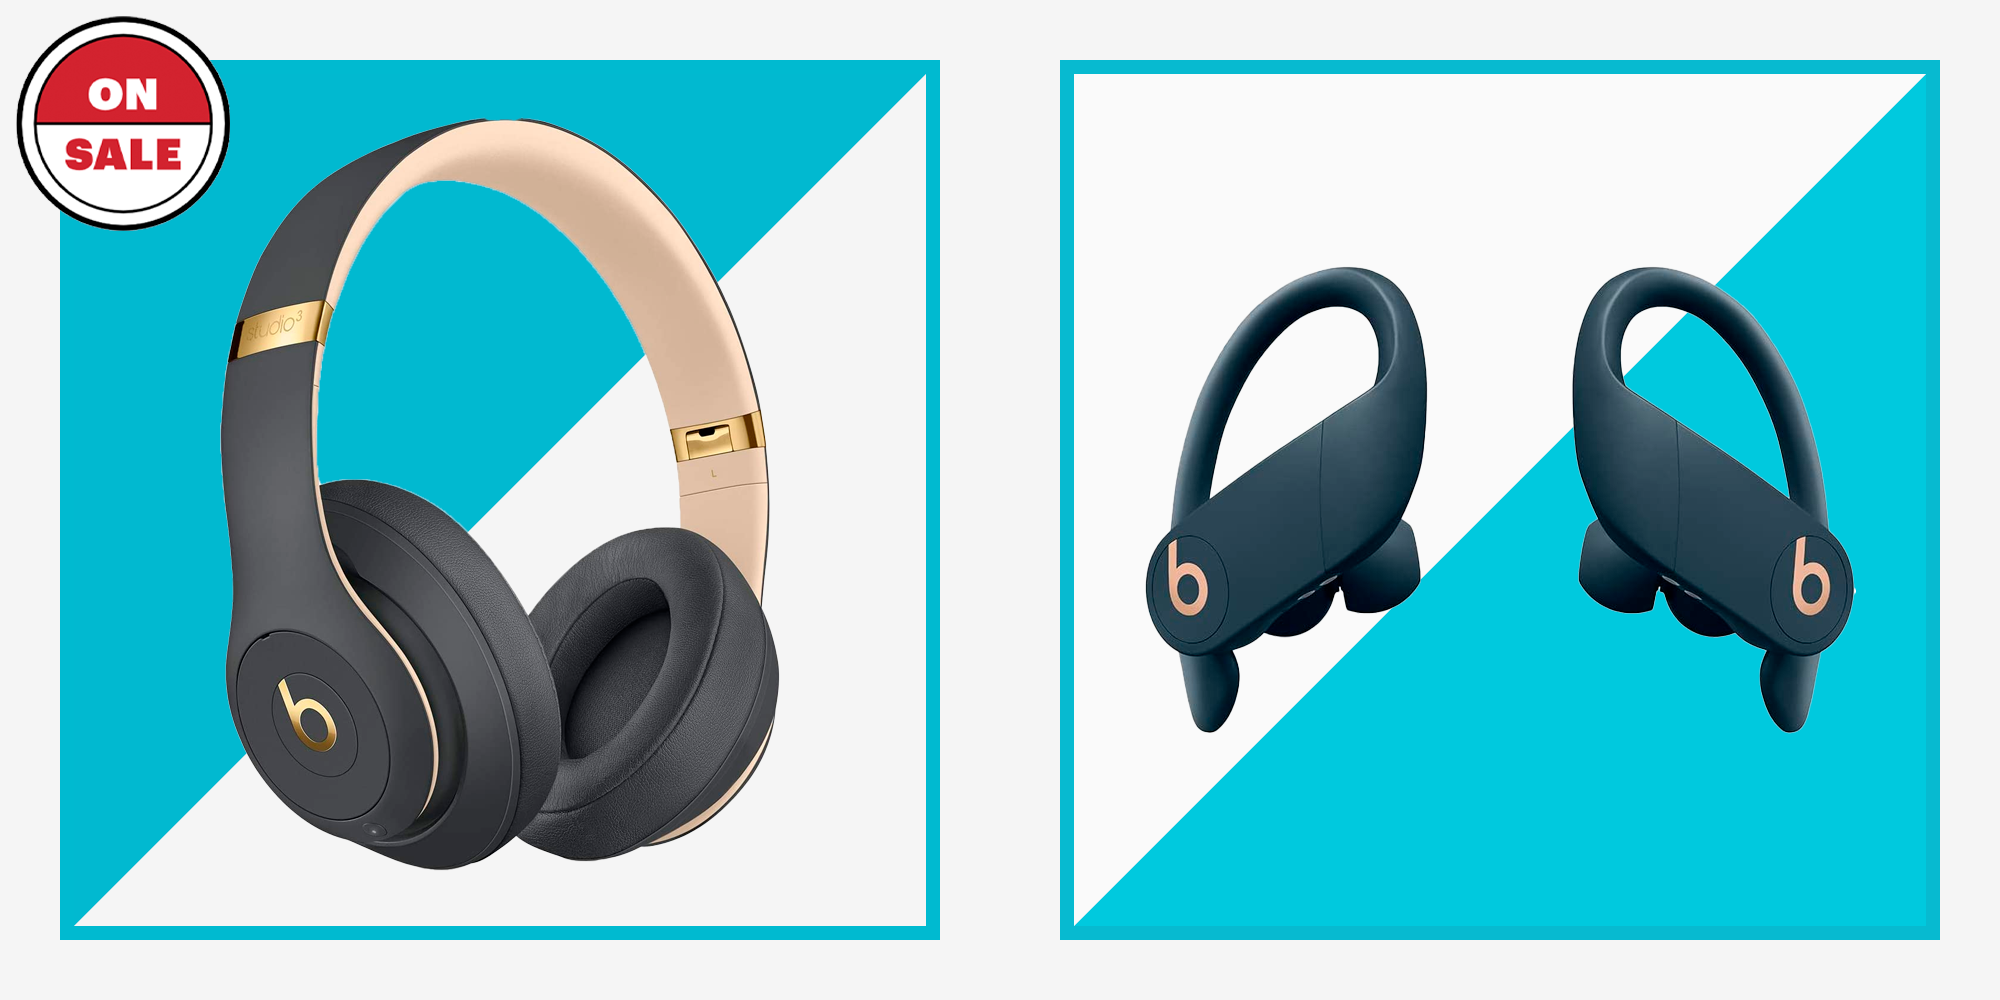 Skynd dig fossil kompas Snag Beats Headphones for $150 Off: Amazon Presidents' Day Deals